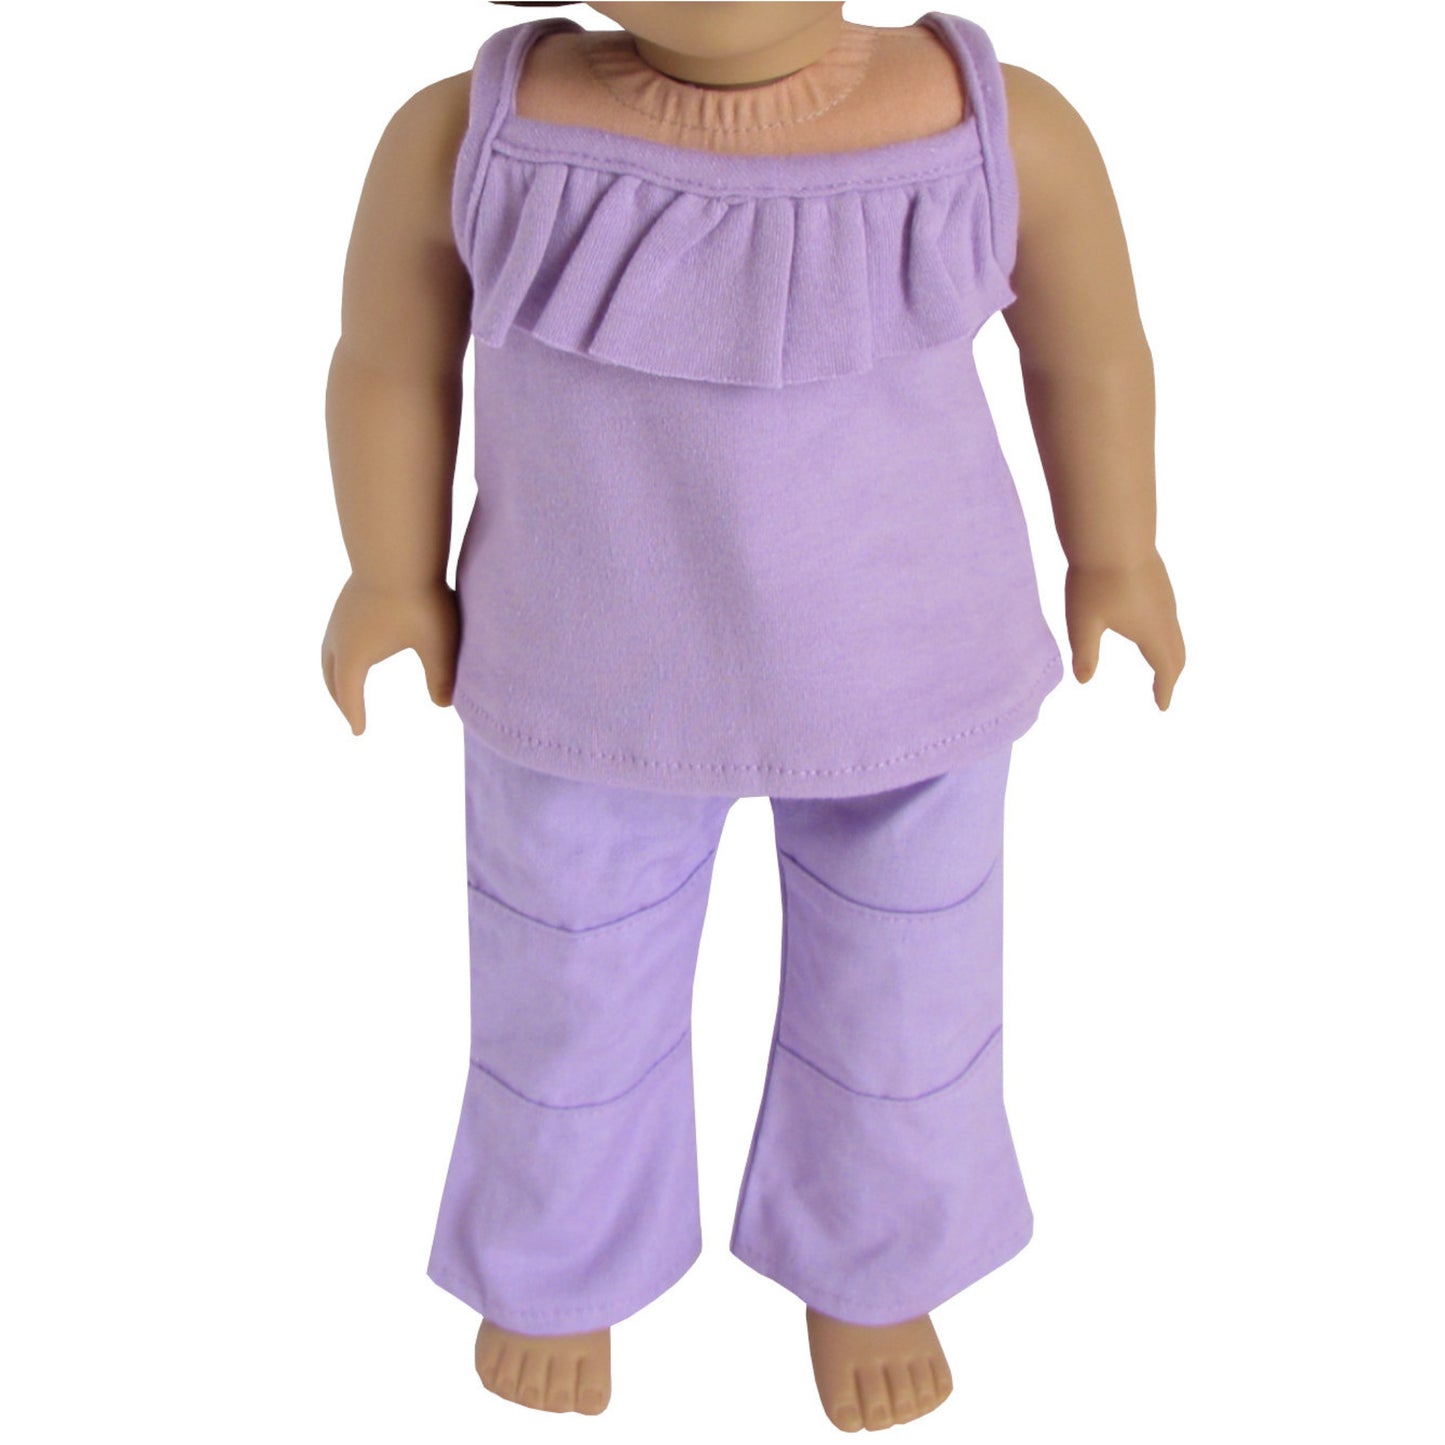 Lavender Tank Top and Pants for 18-inch dolls with doll 